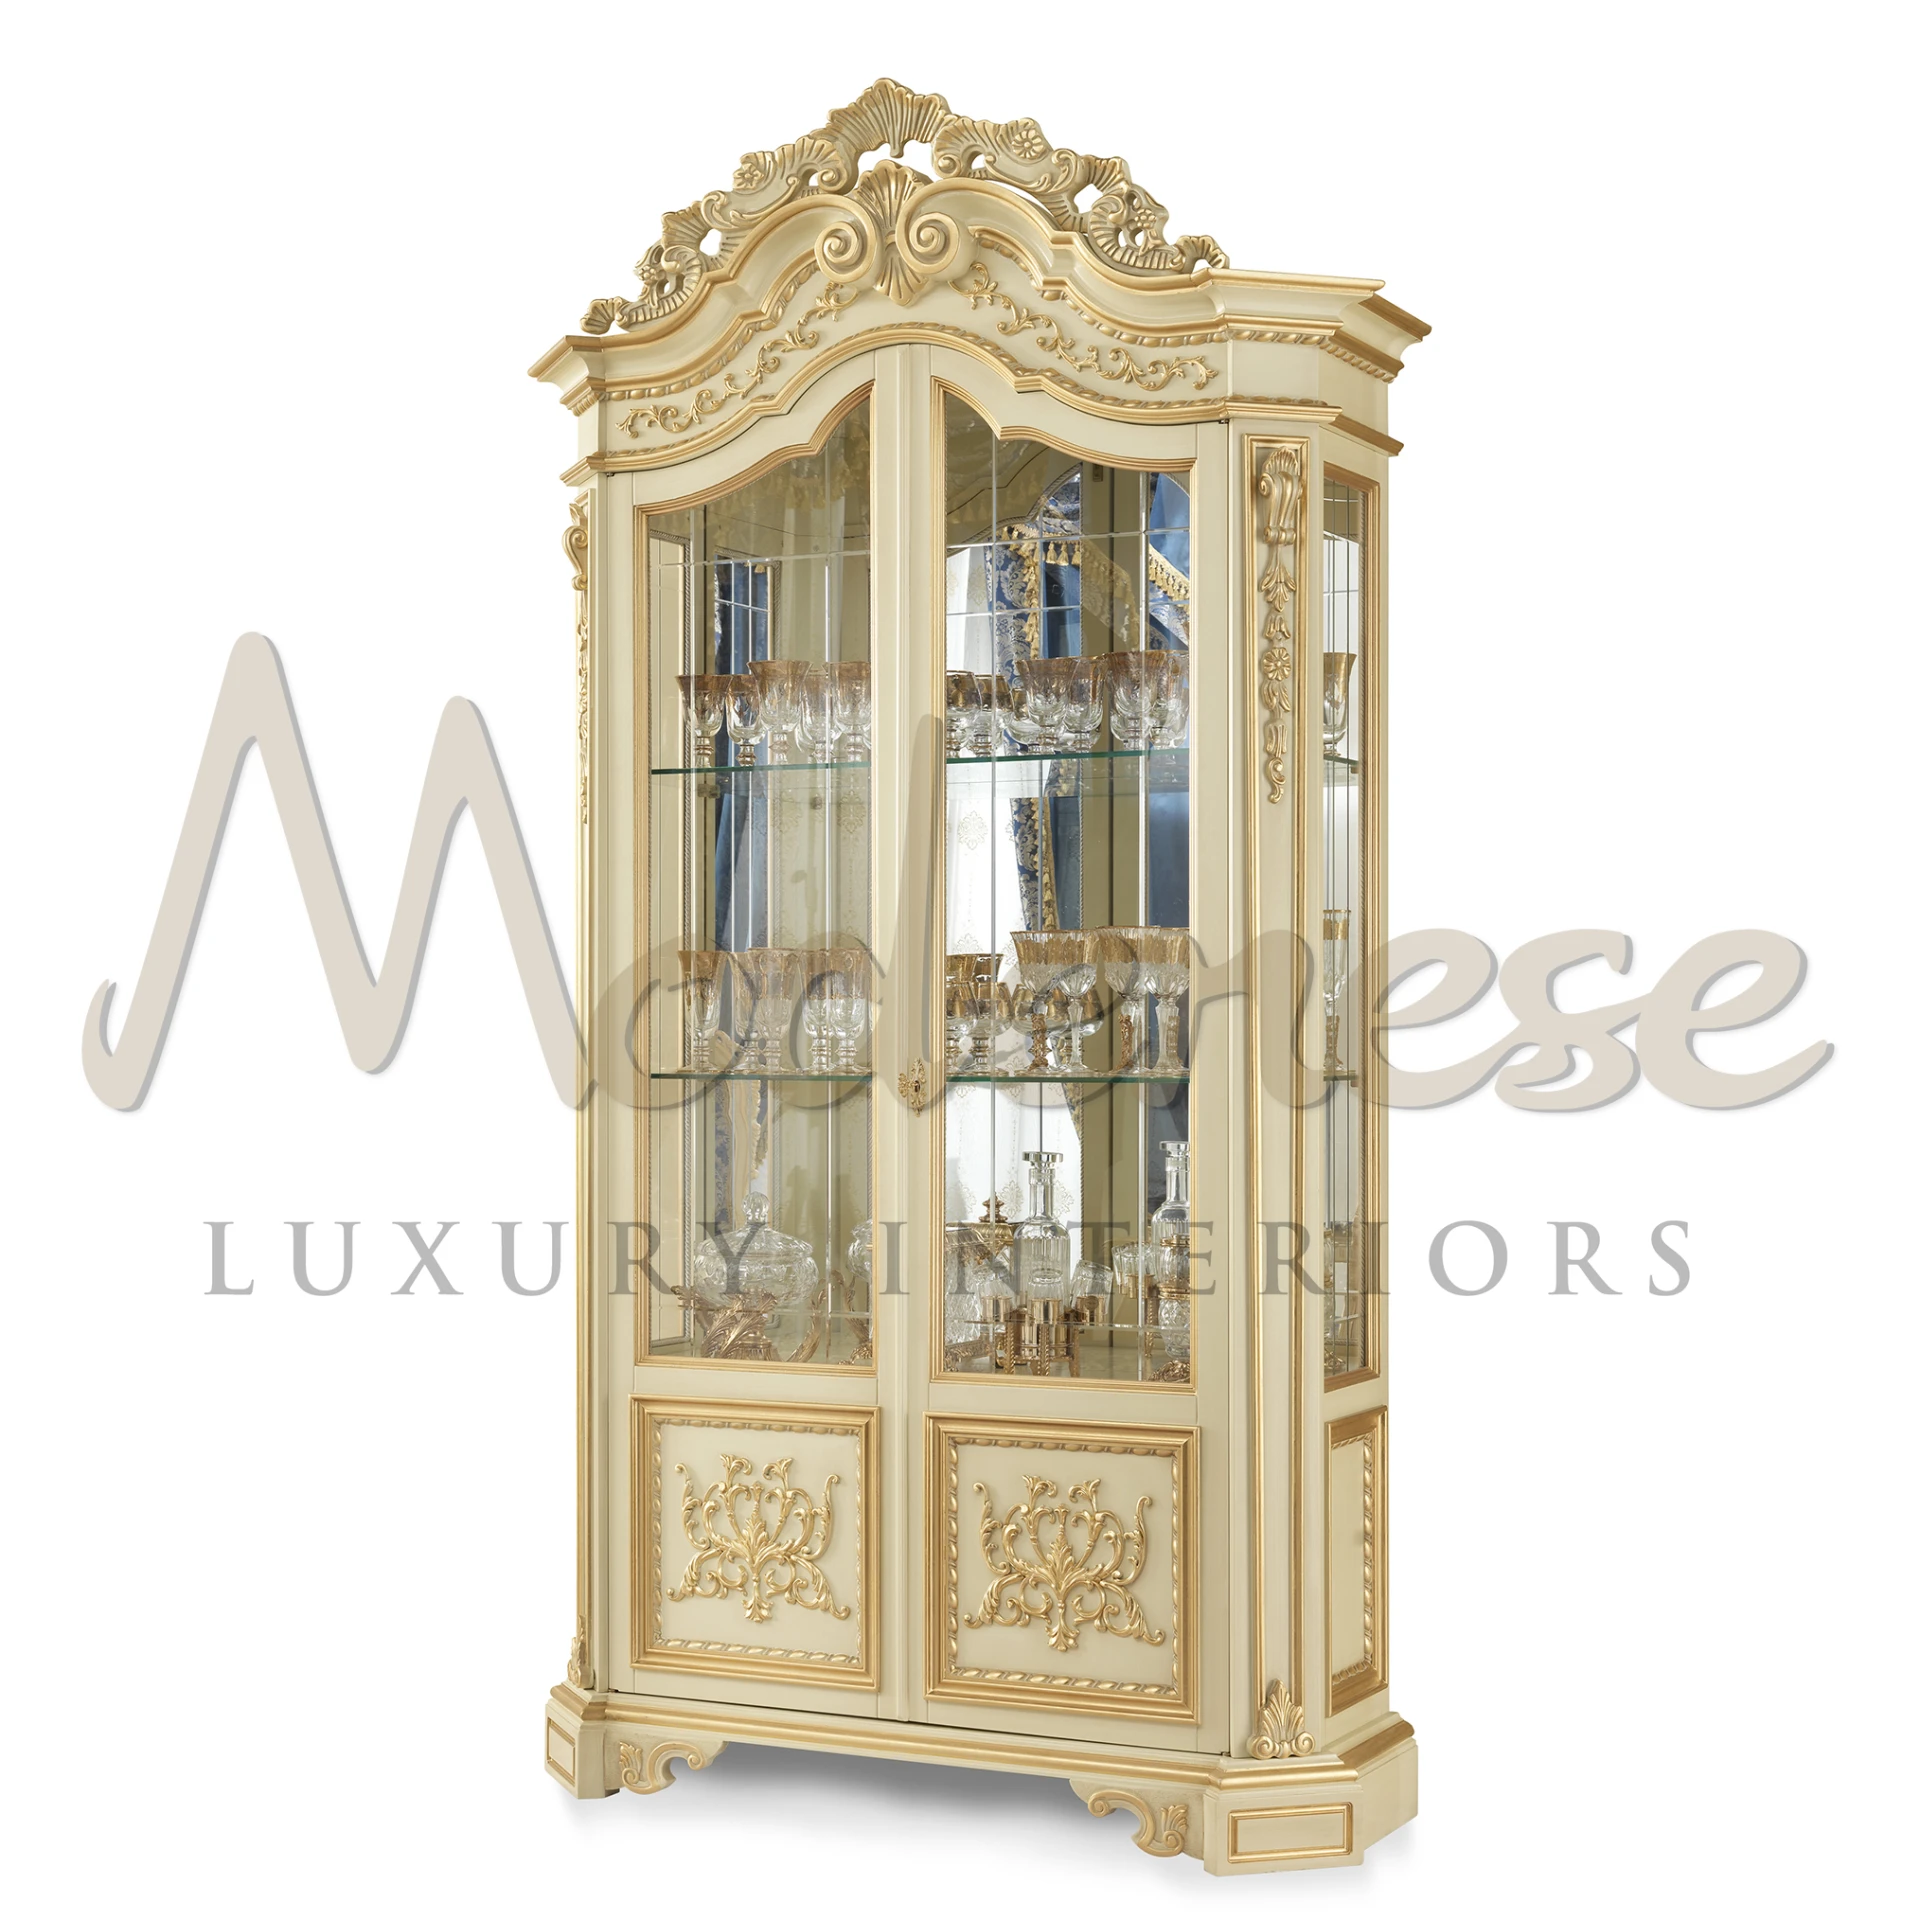 Luxury ivory two doors cabinet with complex golden carvings